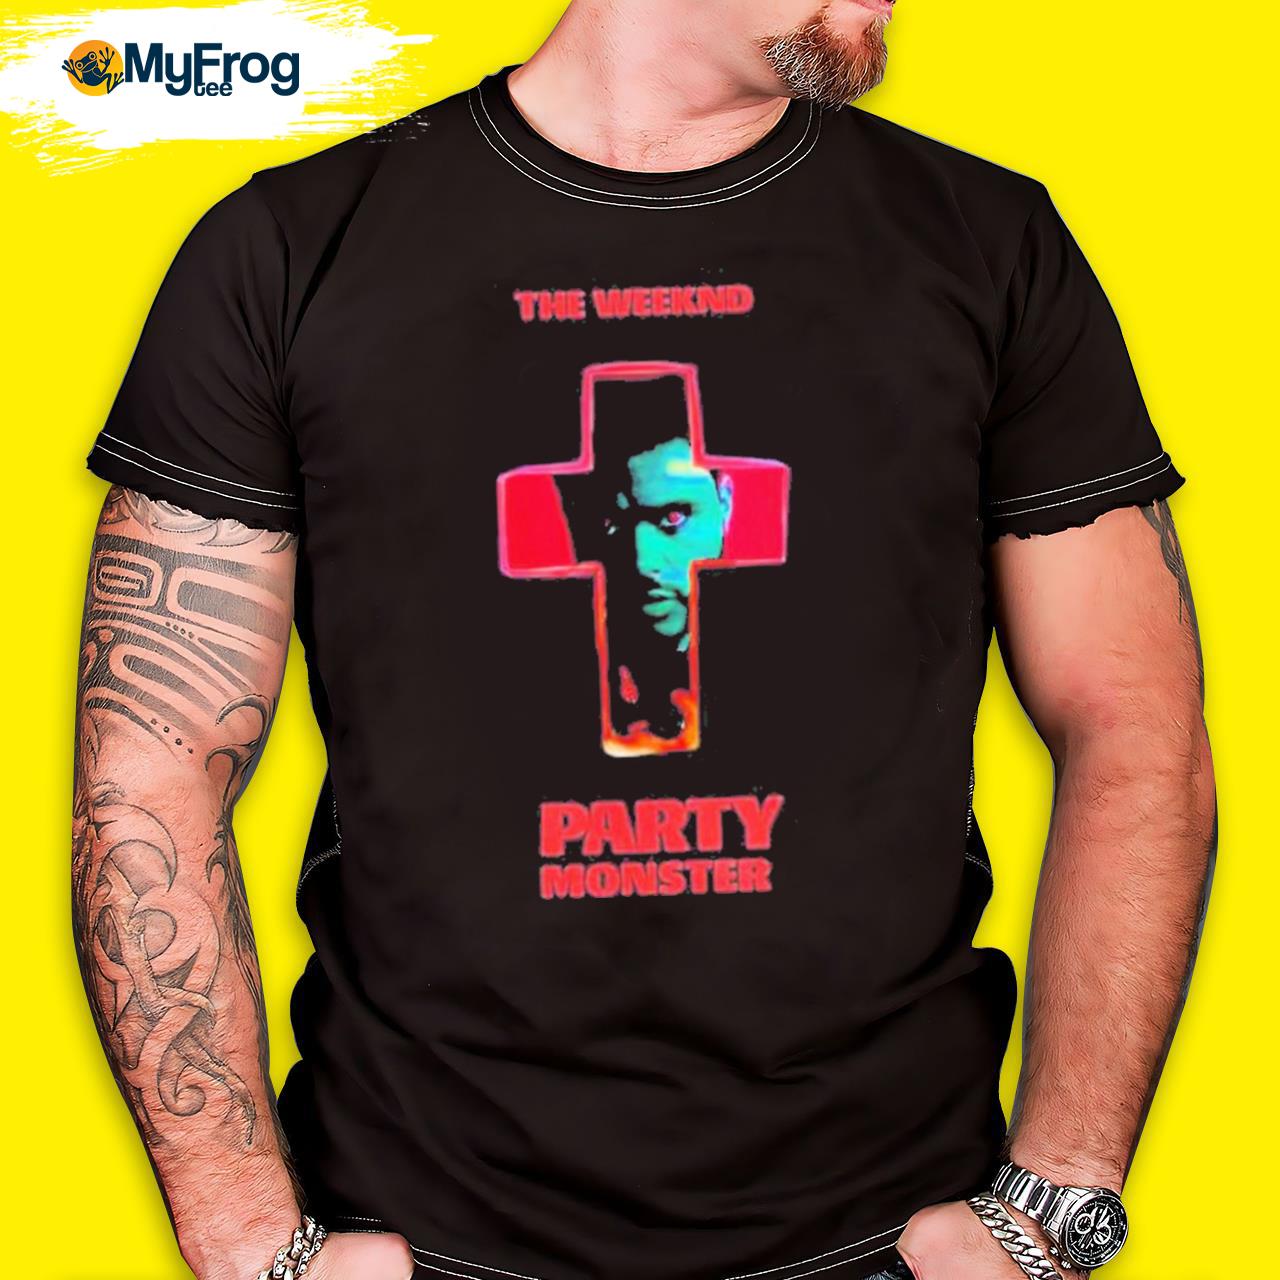 The Weeknd Party Monster Shirt